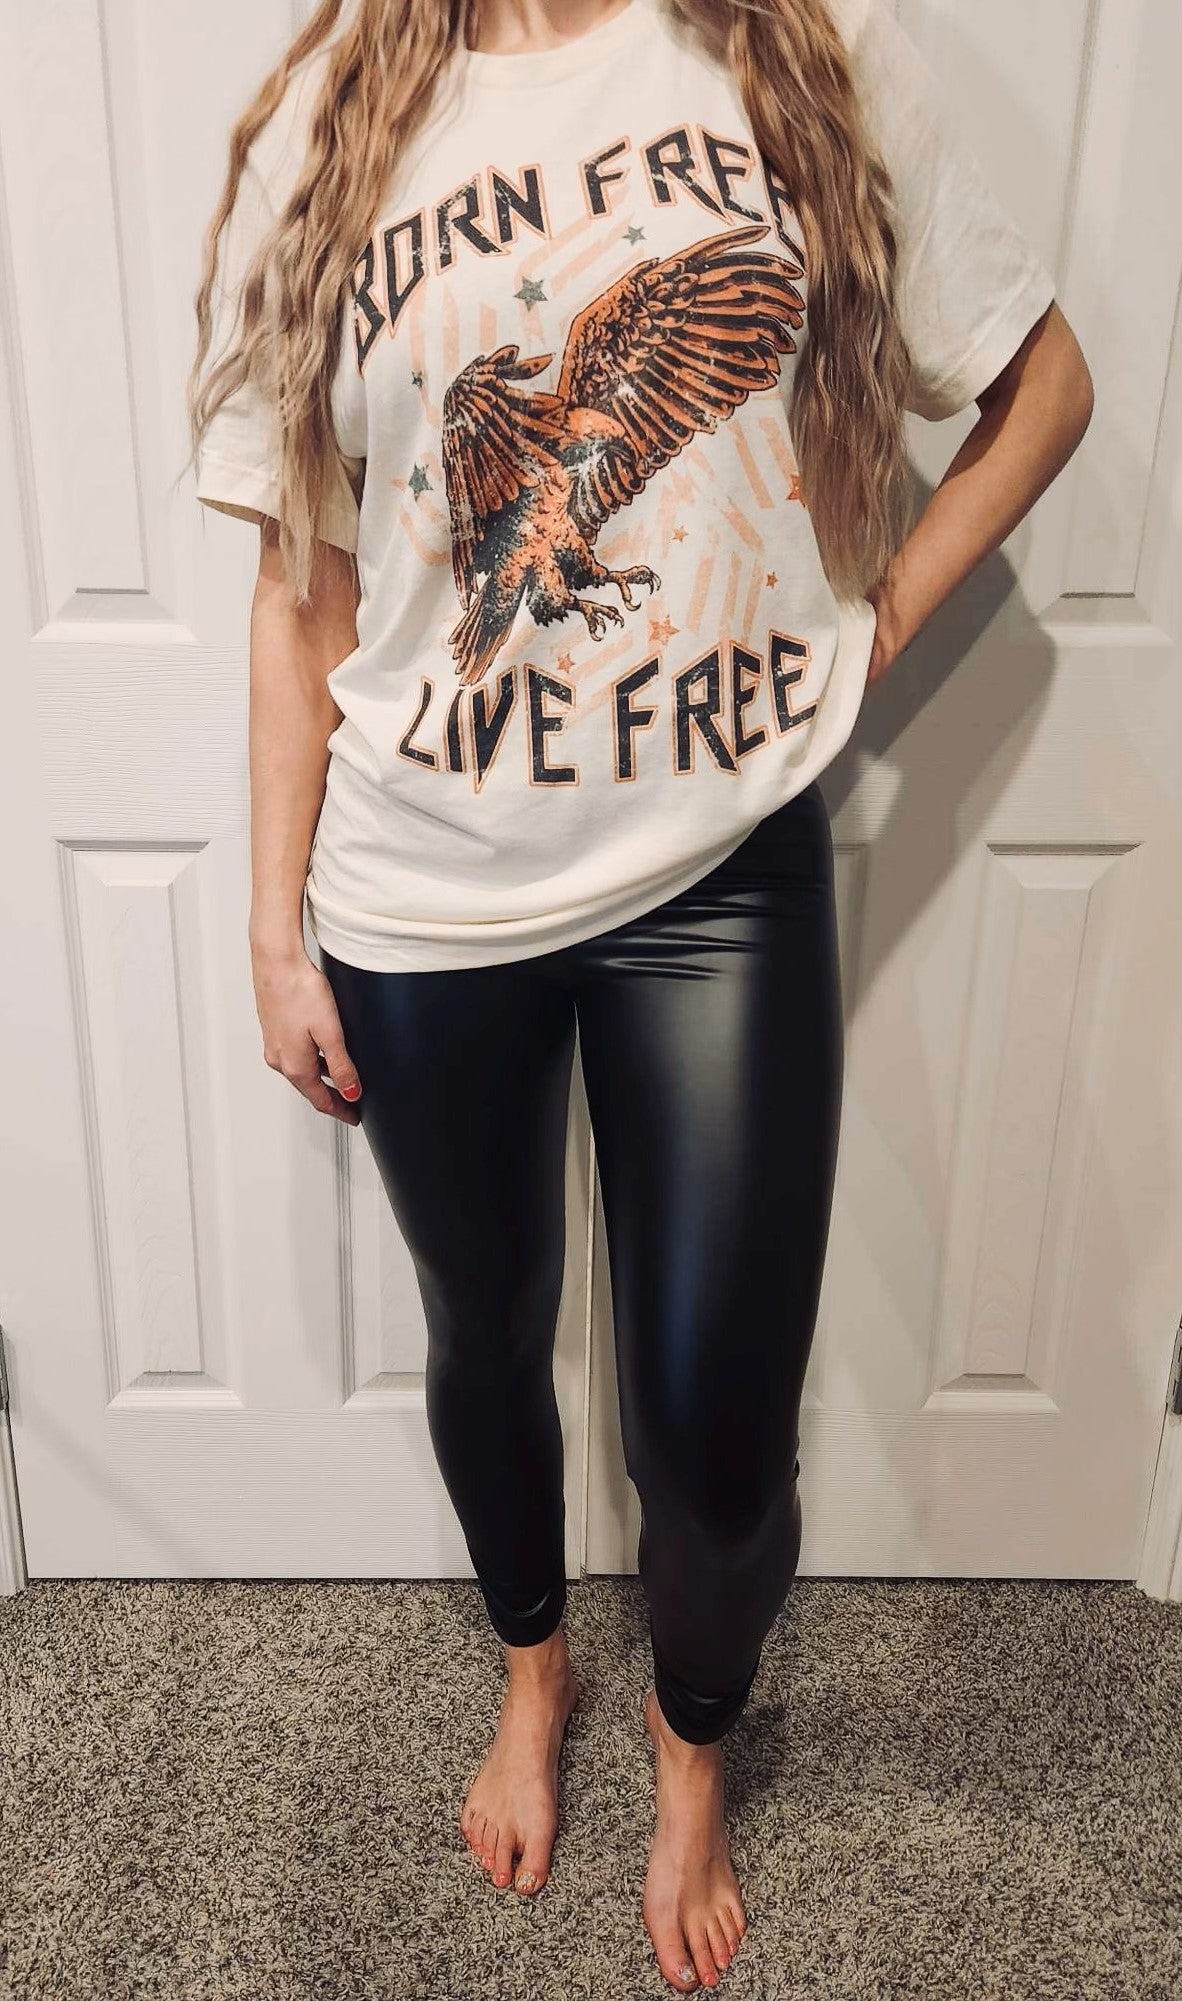 Oversized graphic tee and leggings outfit